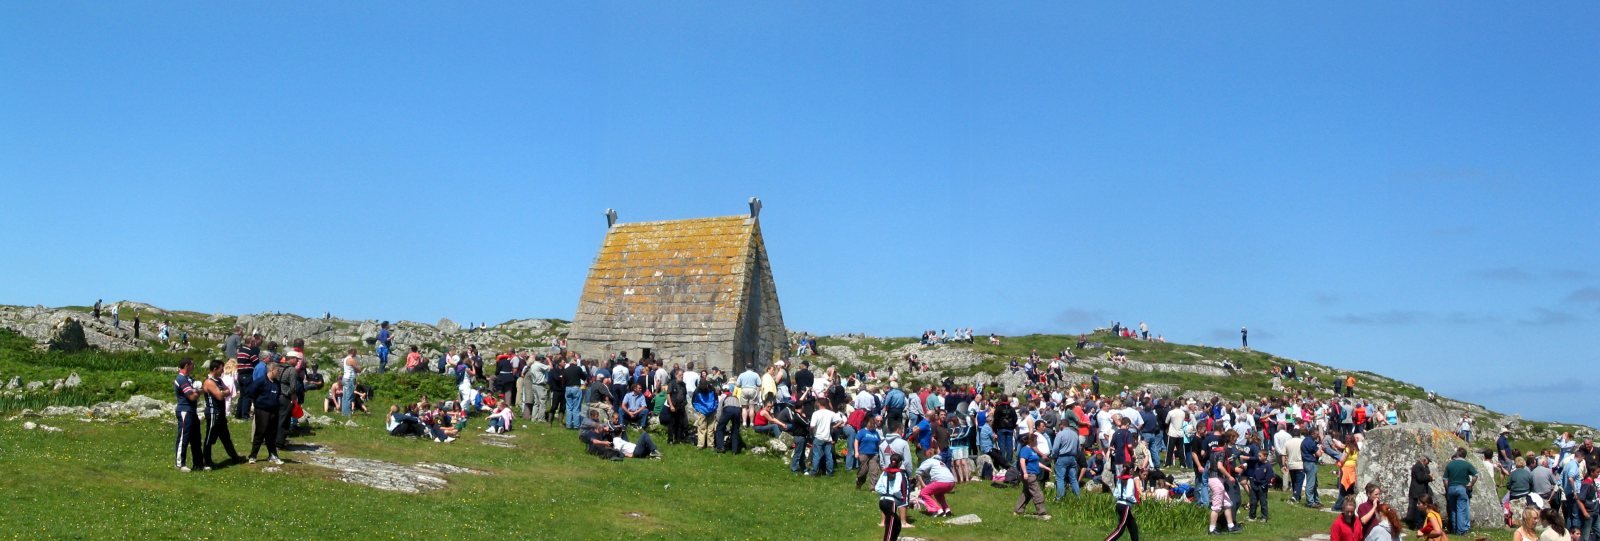 July `16 - Attending Mass at the oratory on Inis Mhic Dara.